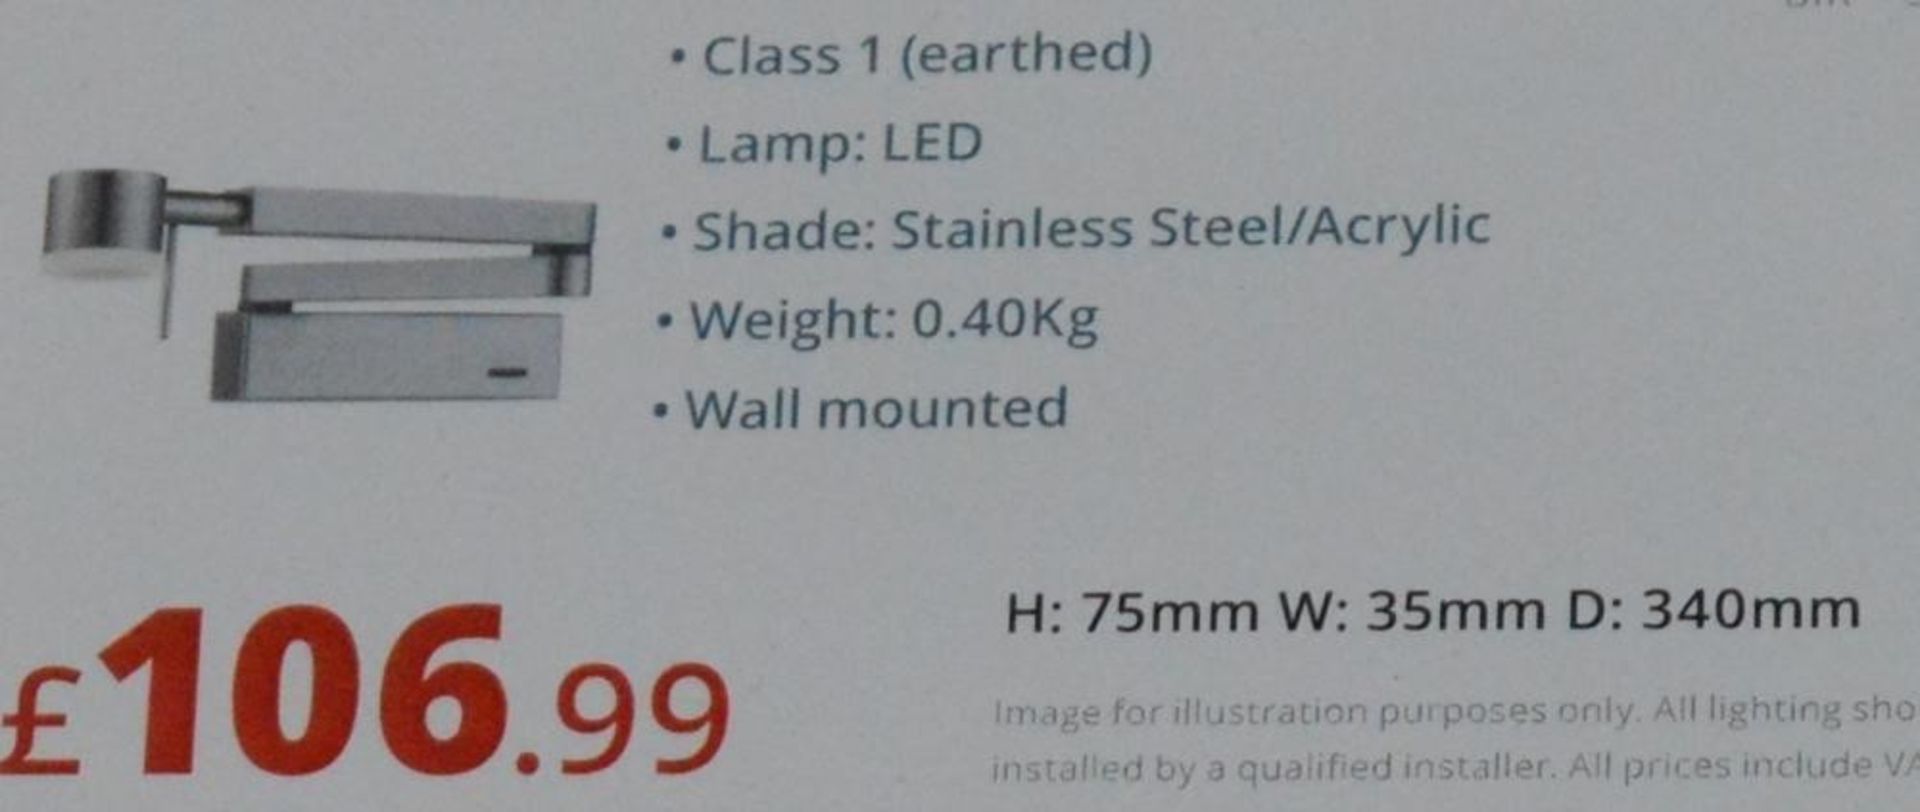 1 x Satin Silver LED Adjustable Wall Light - Ex Display Stock - CL298 - Ref J148 - Location: Altrinc - Image 2 of 3